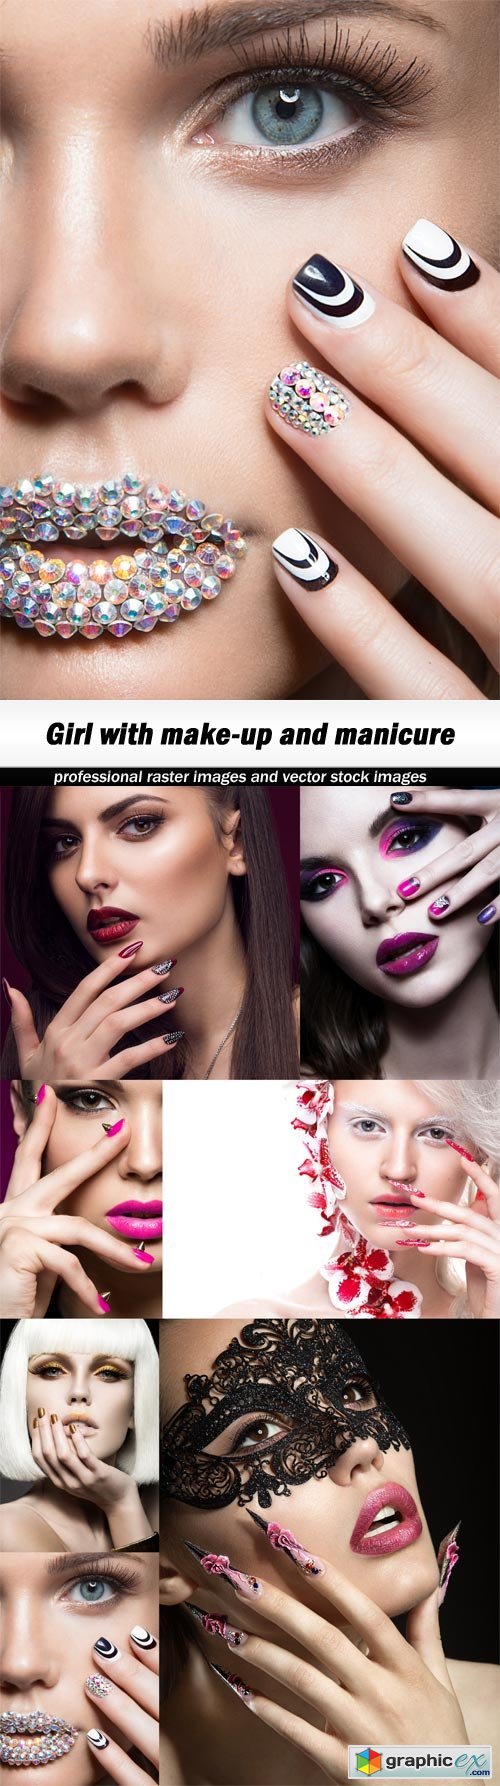 Girl with make-up and manicure - 7 UHQ JPEG